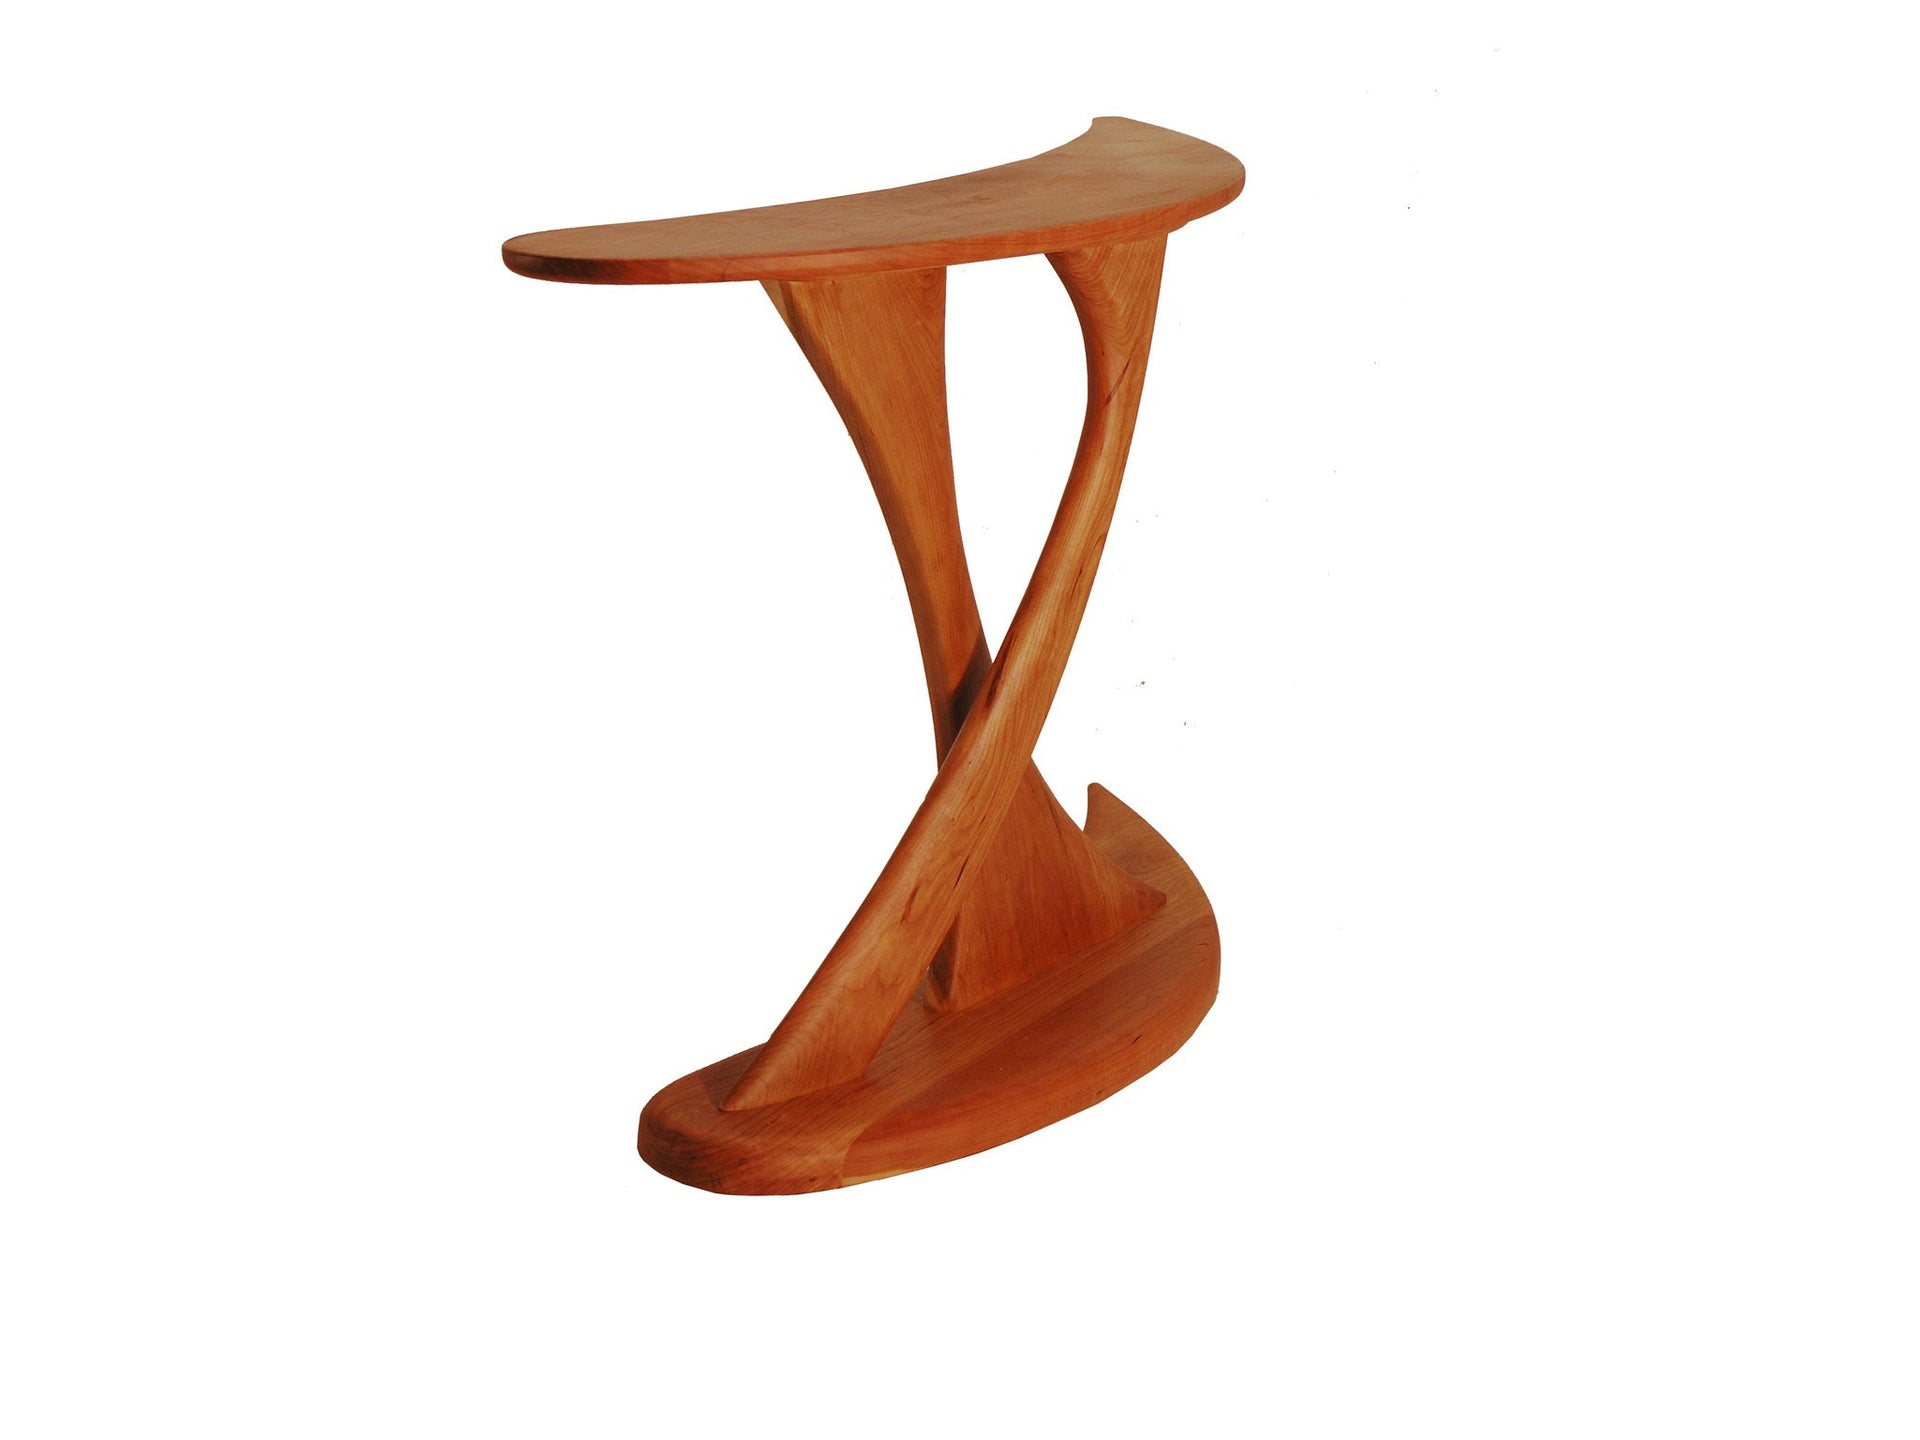 Cantilever Console Table made of Cherry Wood